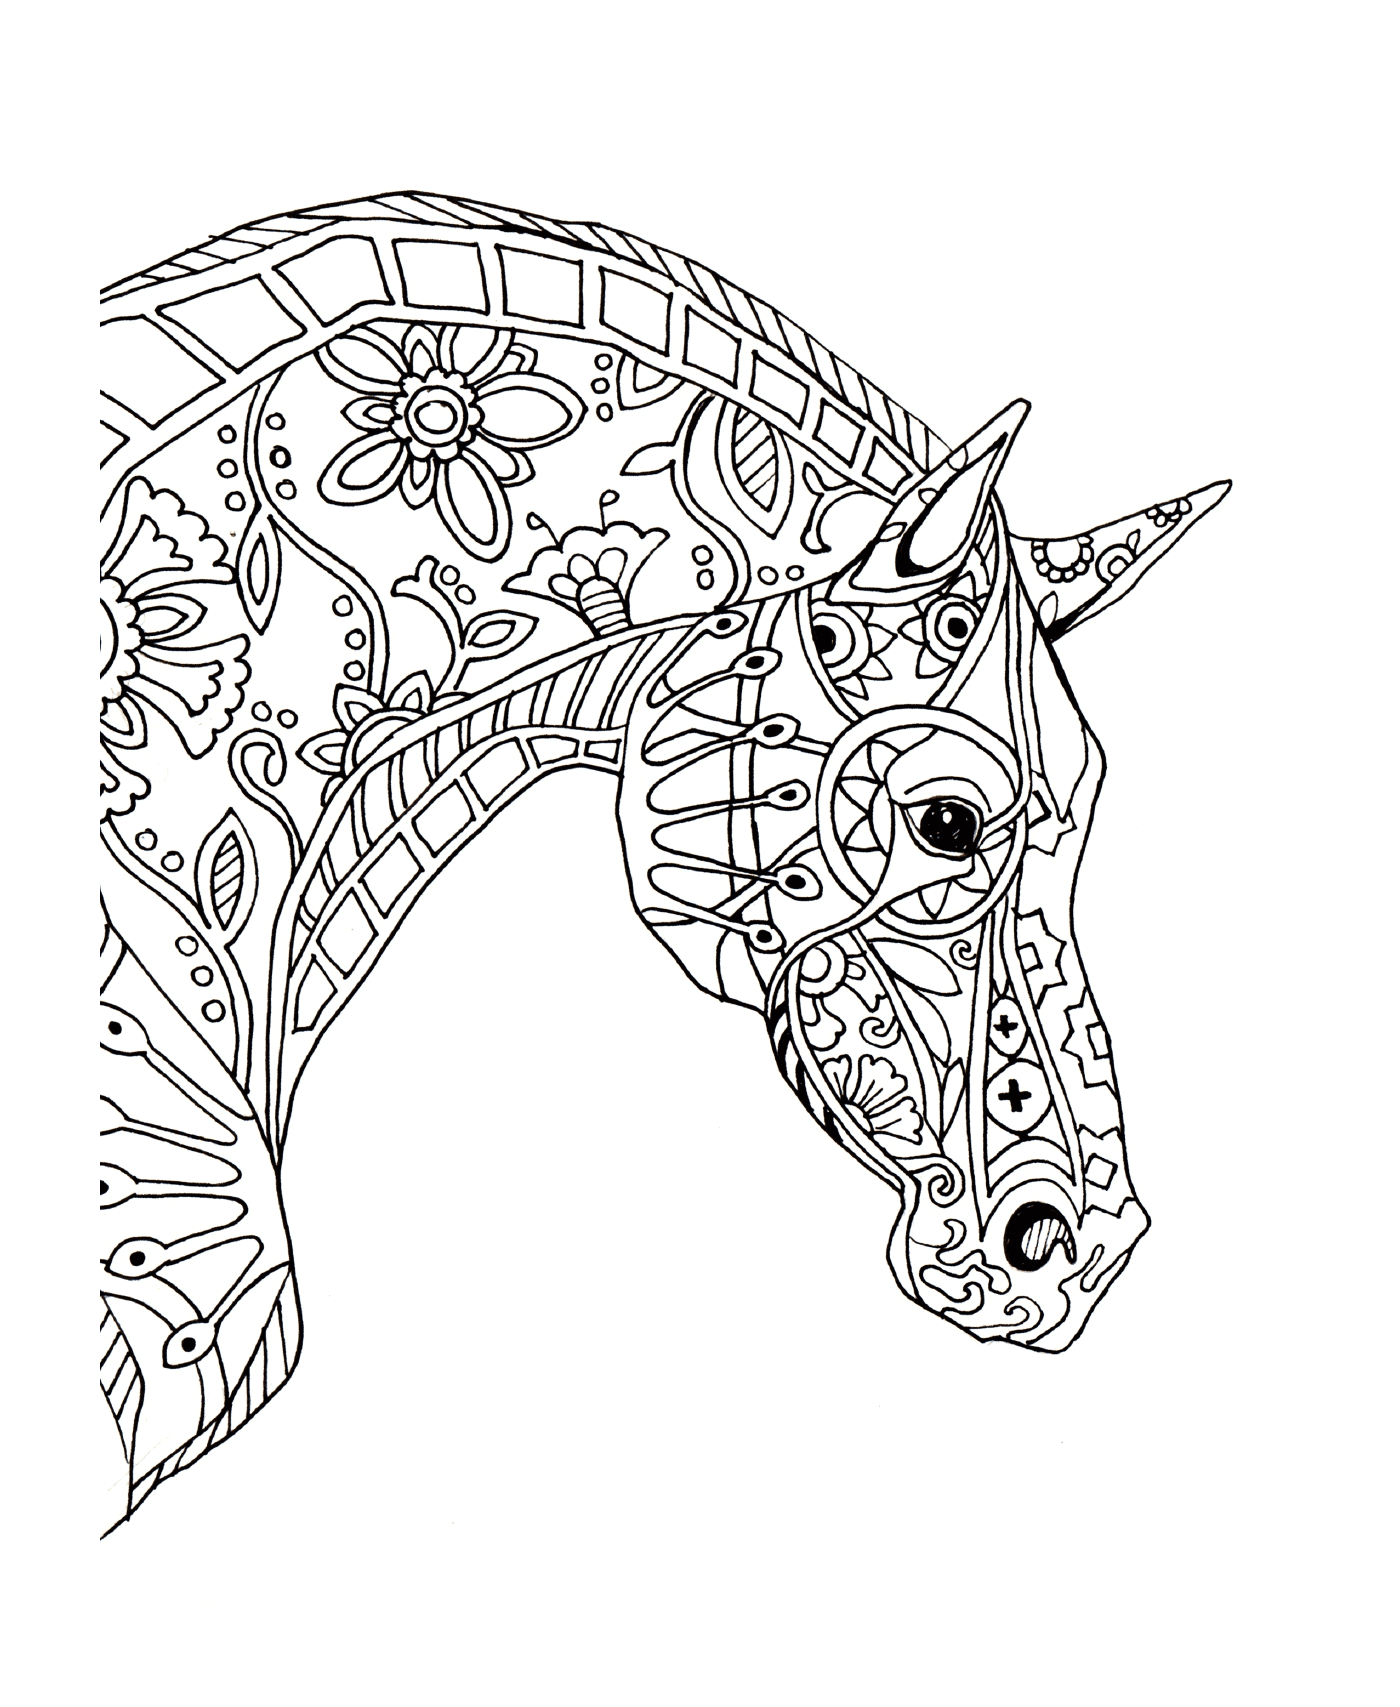  The head of a decorative horse 